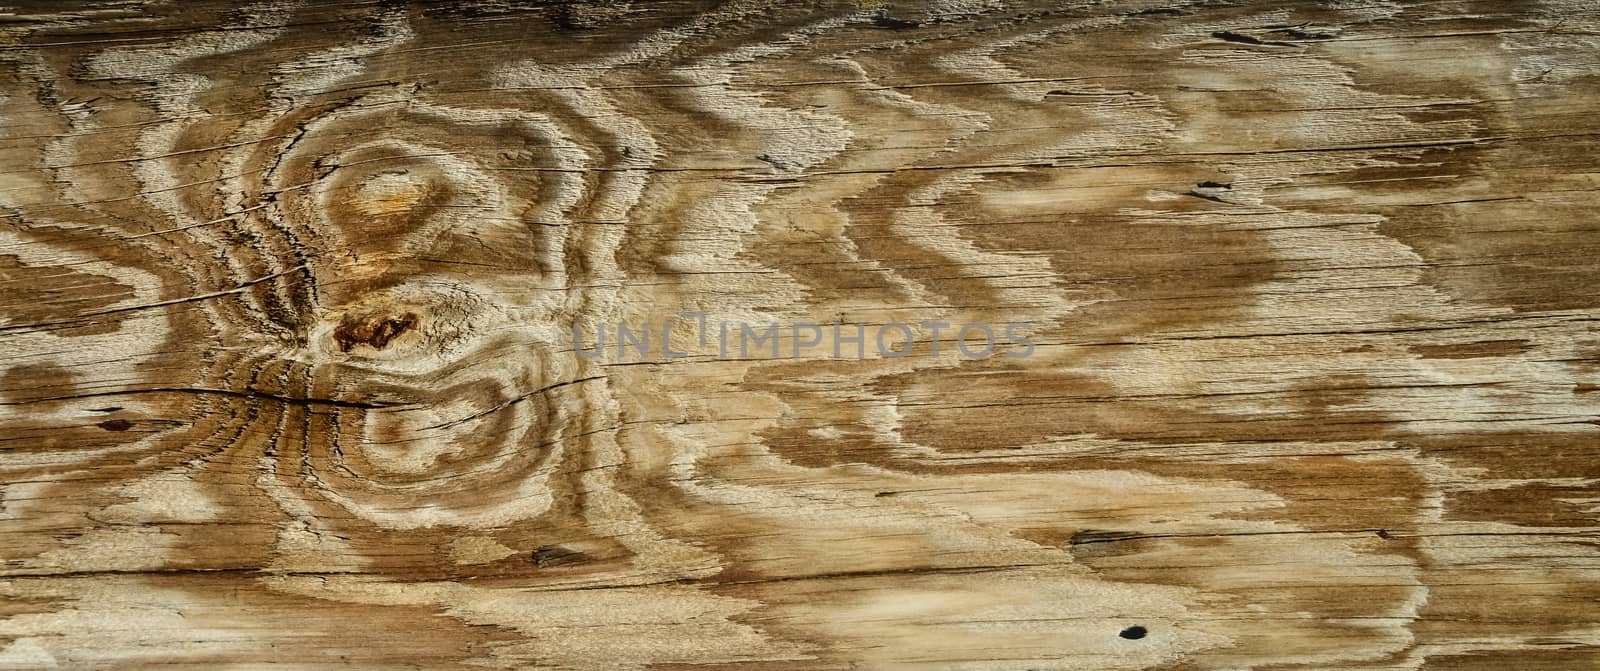 Beautiful pattern of annual rings on old wood by Hydrobiolog